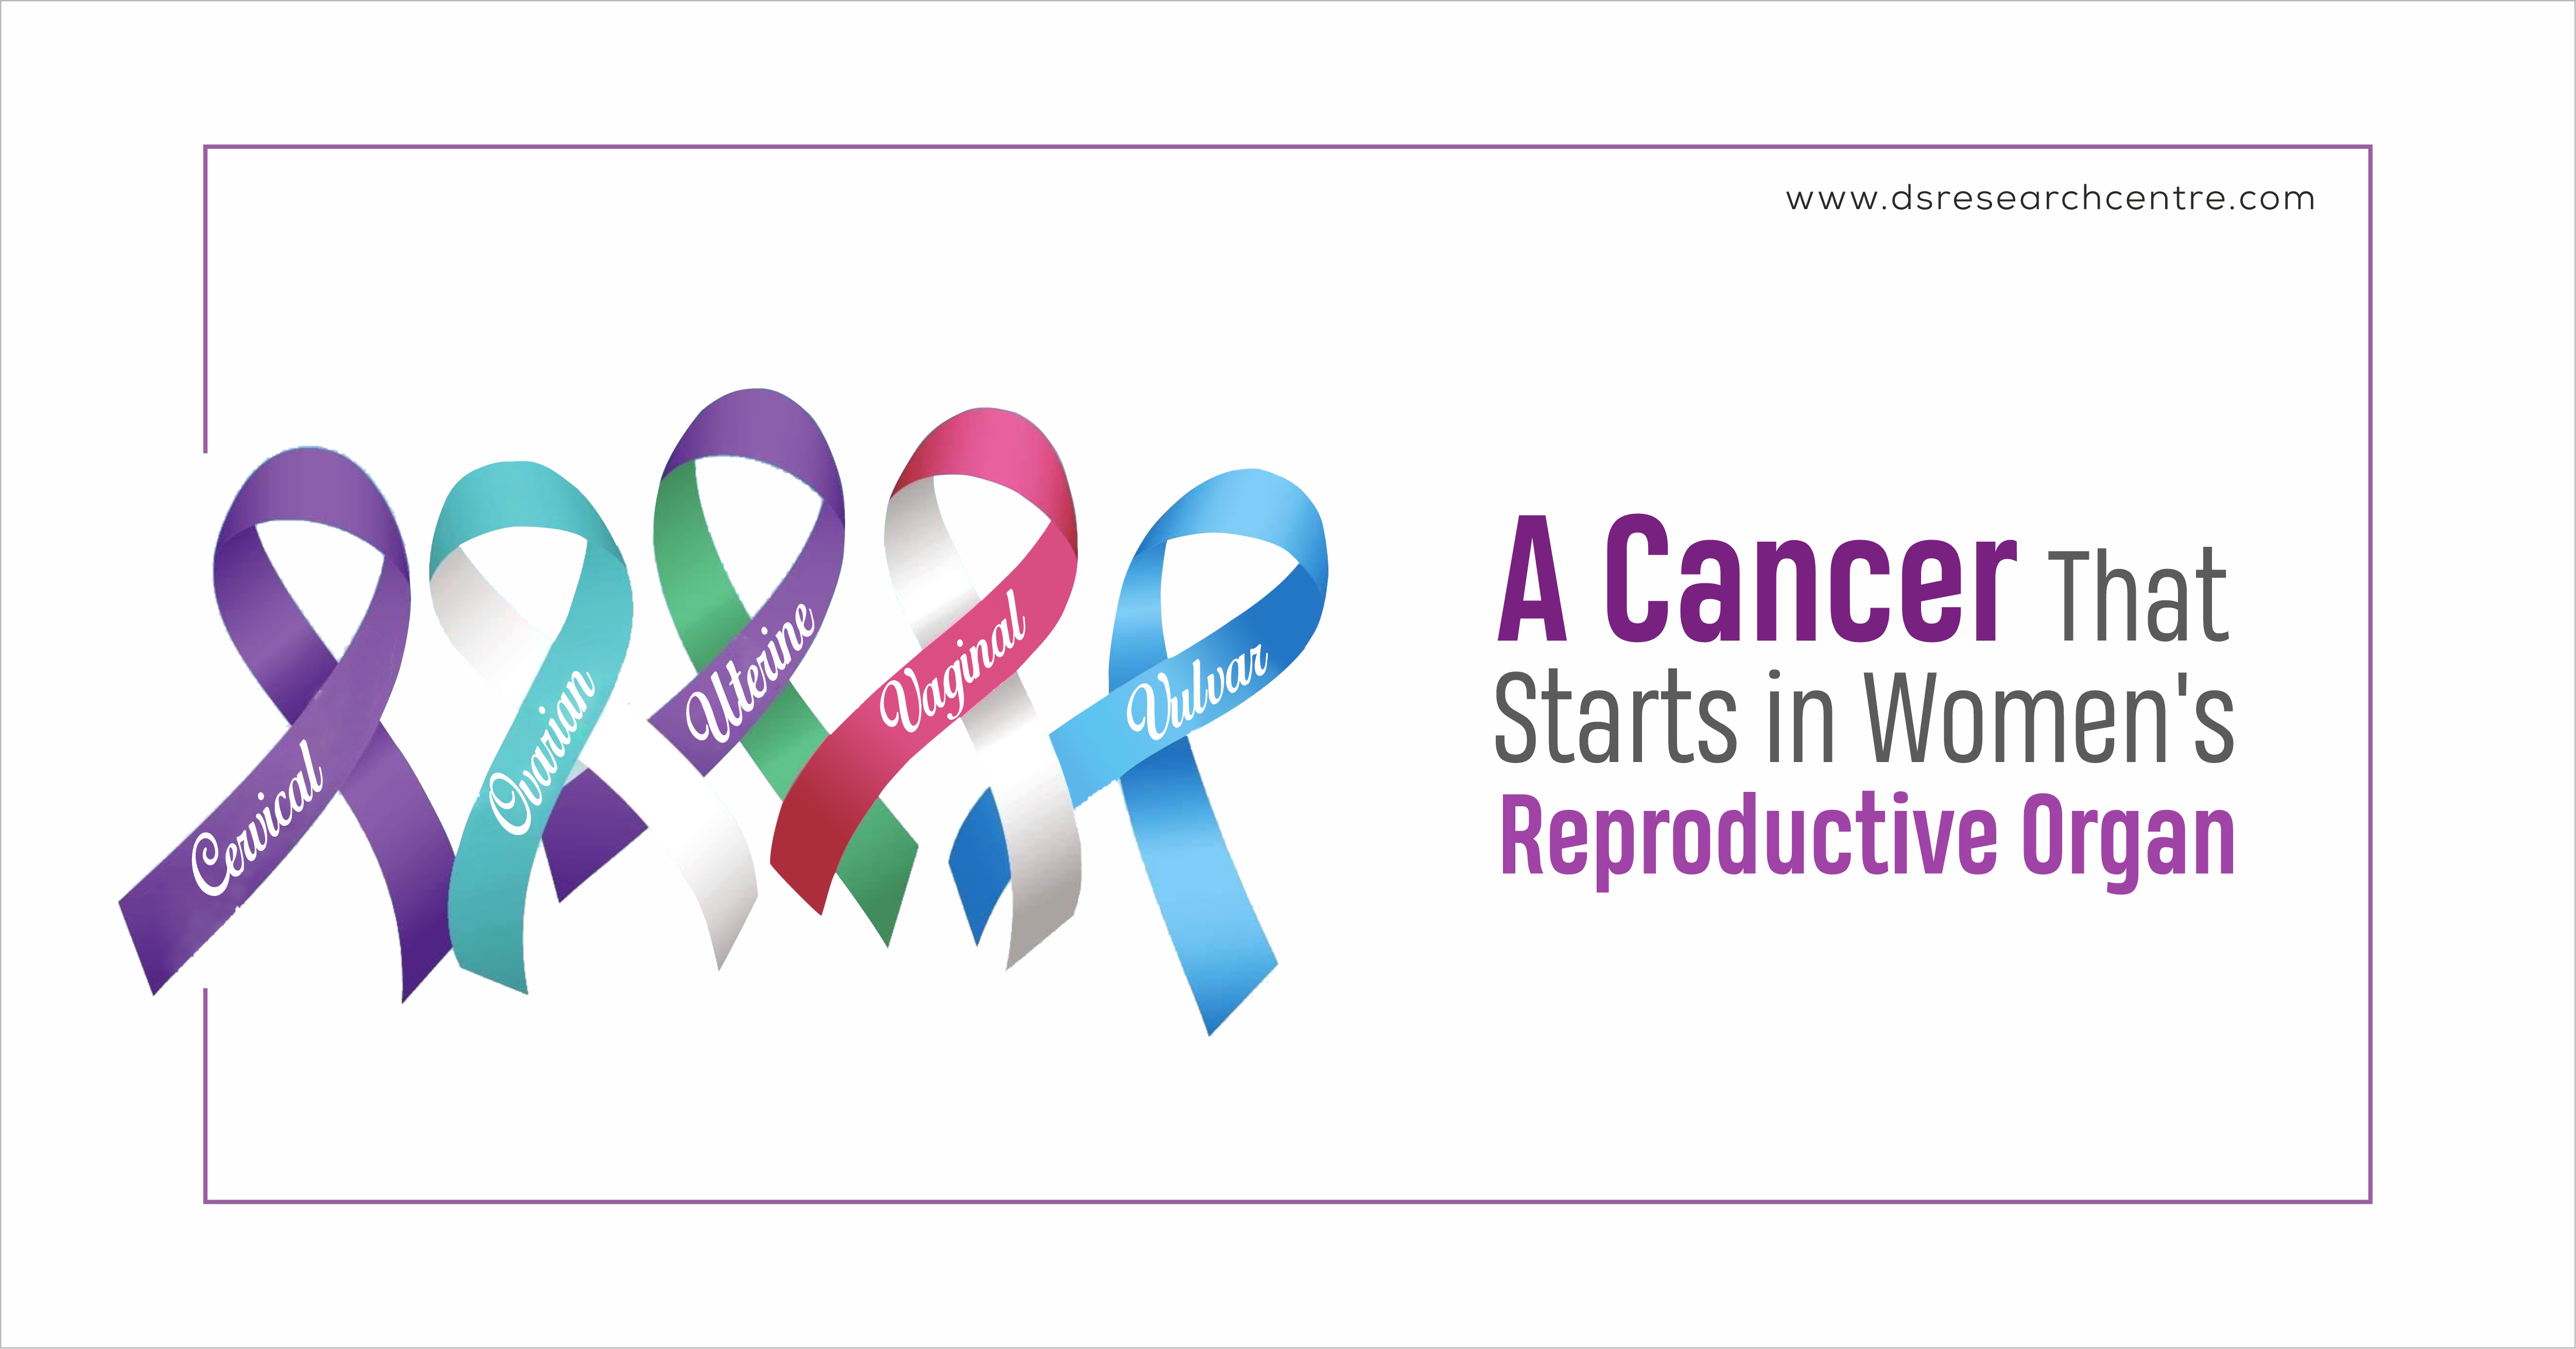 A Cancer Starts in Women's Reproductive Organ